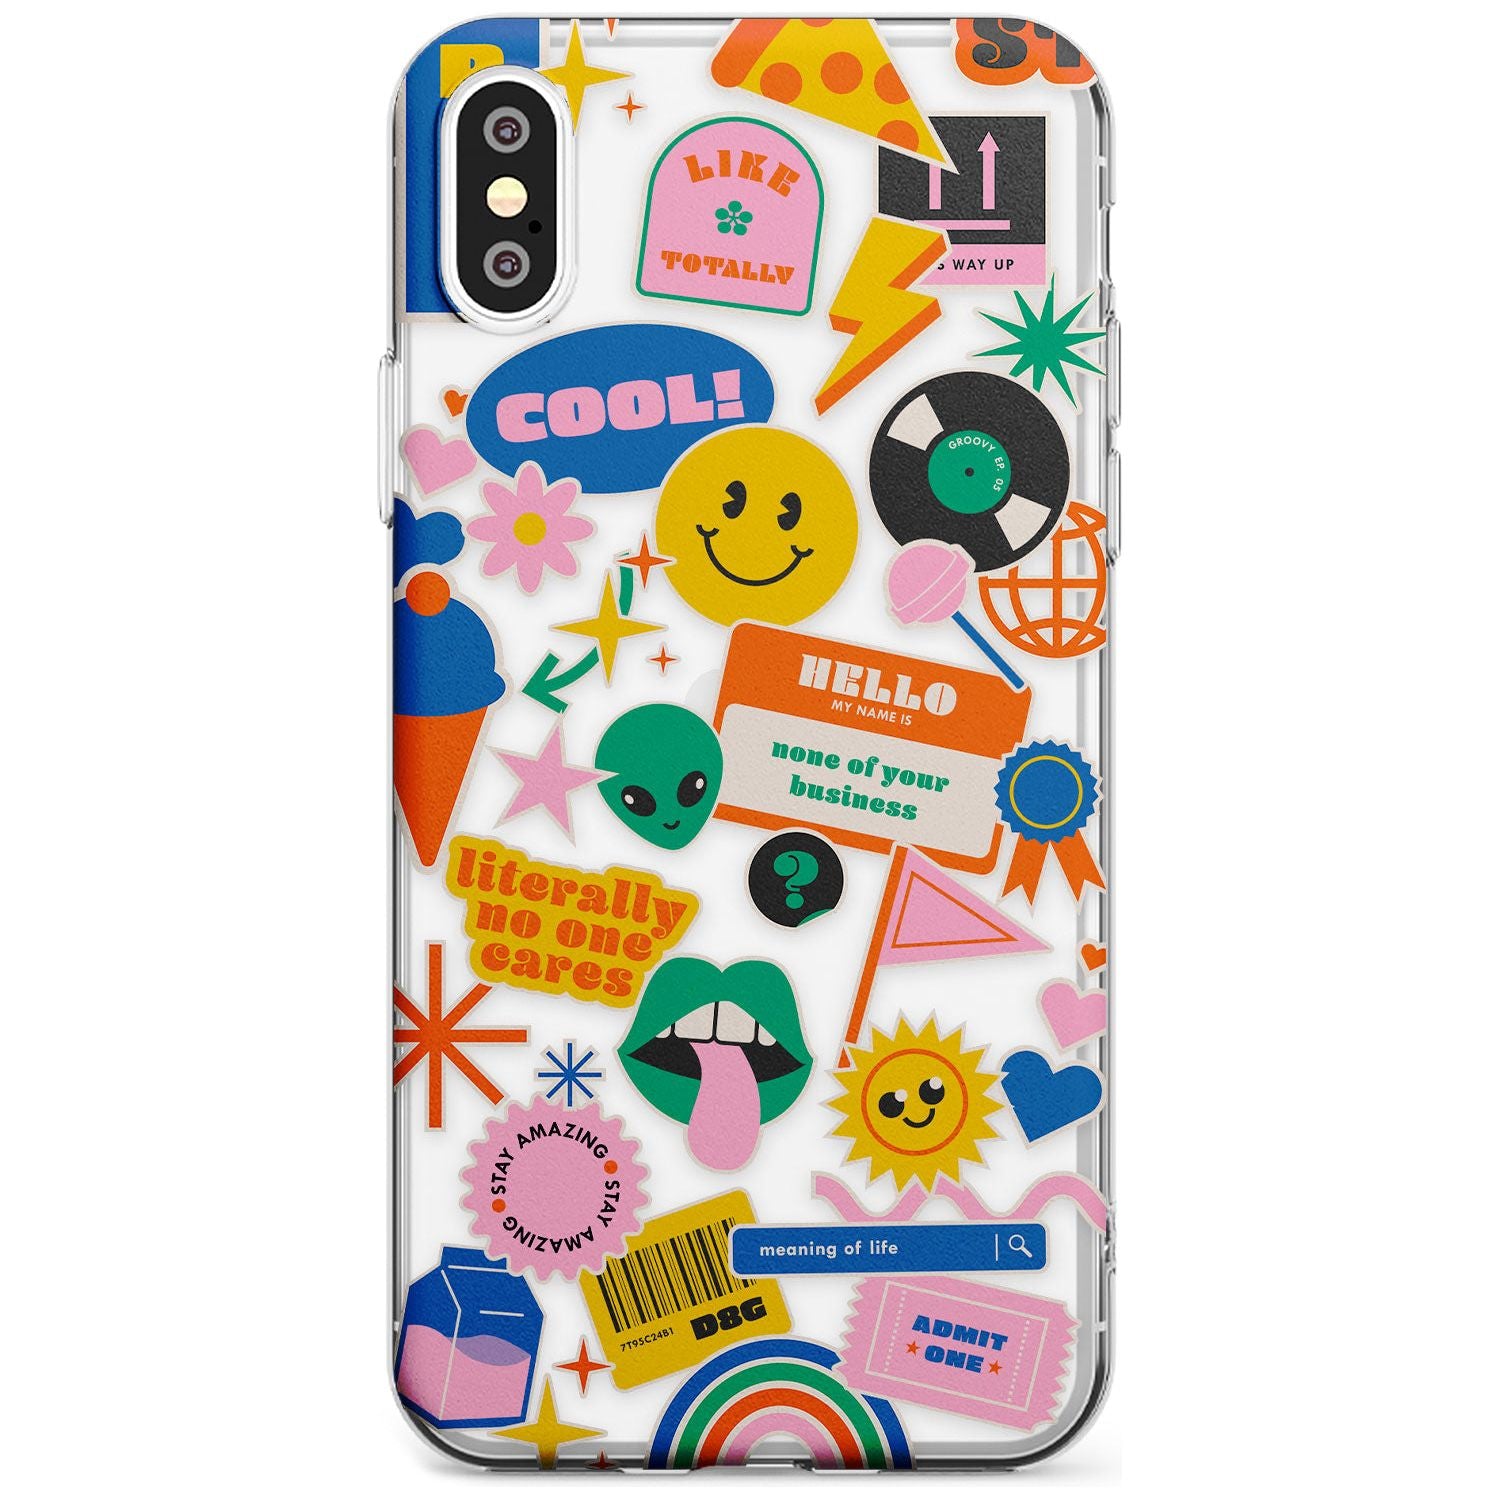 Nostalgic Stickers #1 Black Impact Phone Case for iPhone X XS Max XR